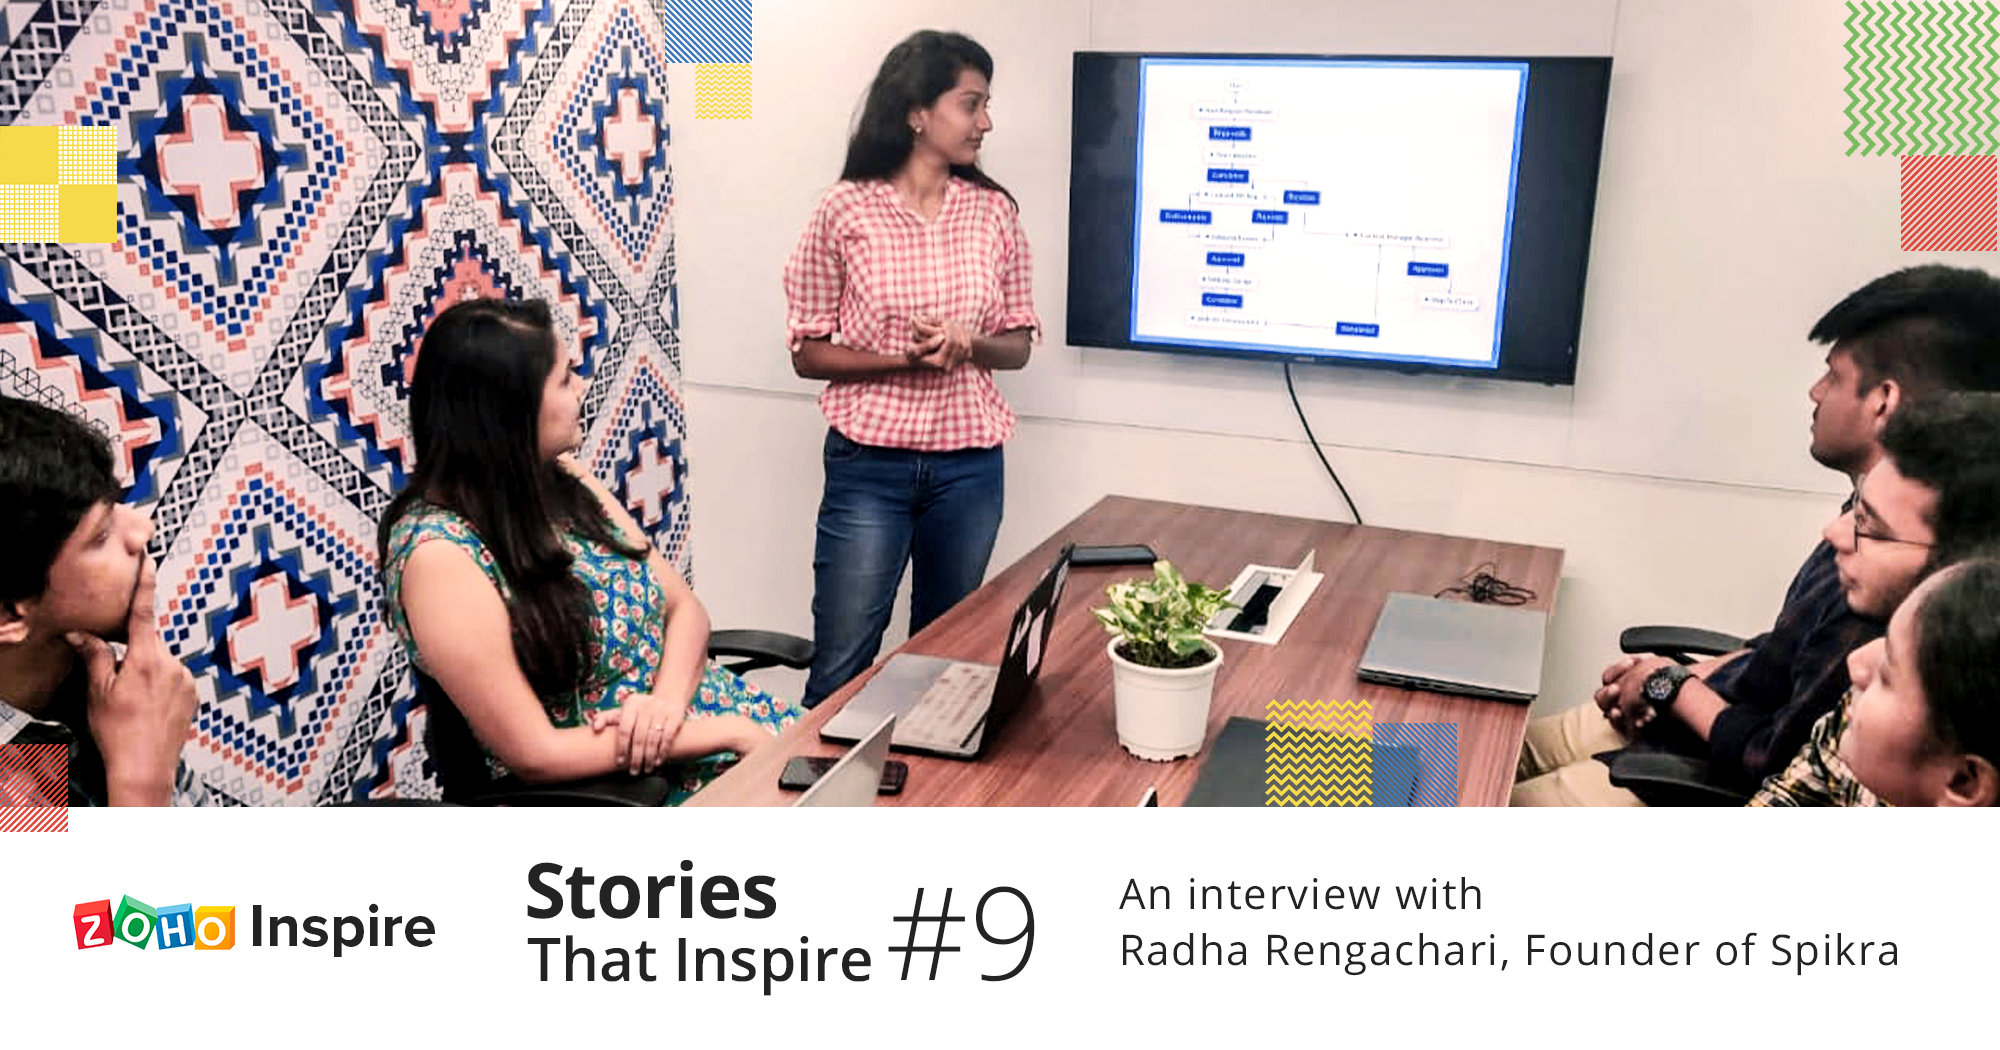 Radha, founder of spikra in a brainstorming session with her team.